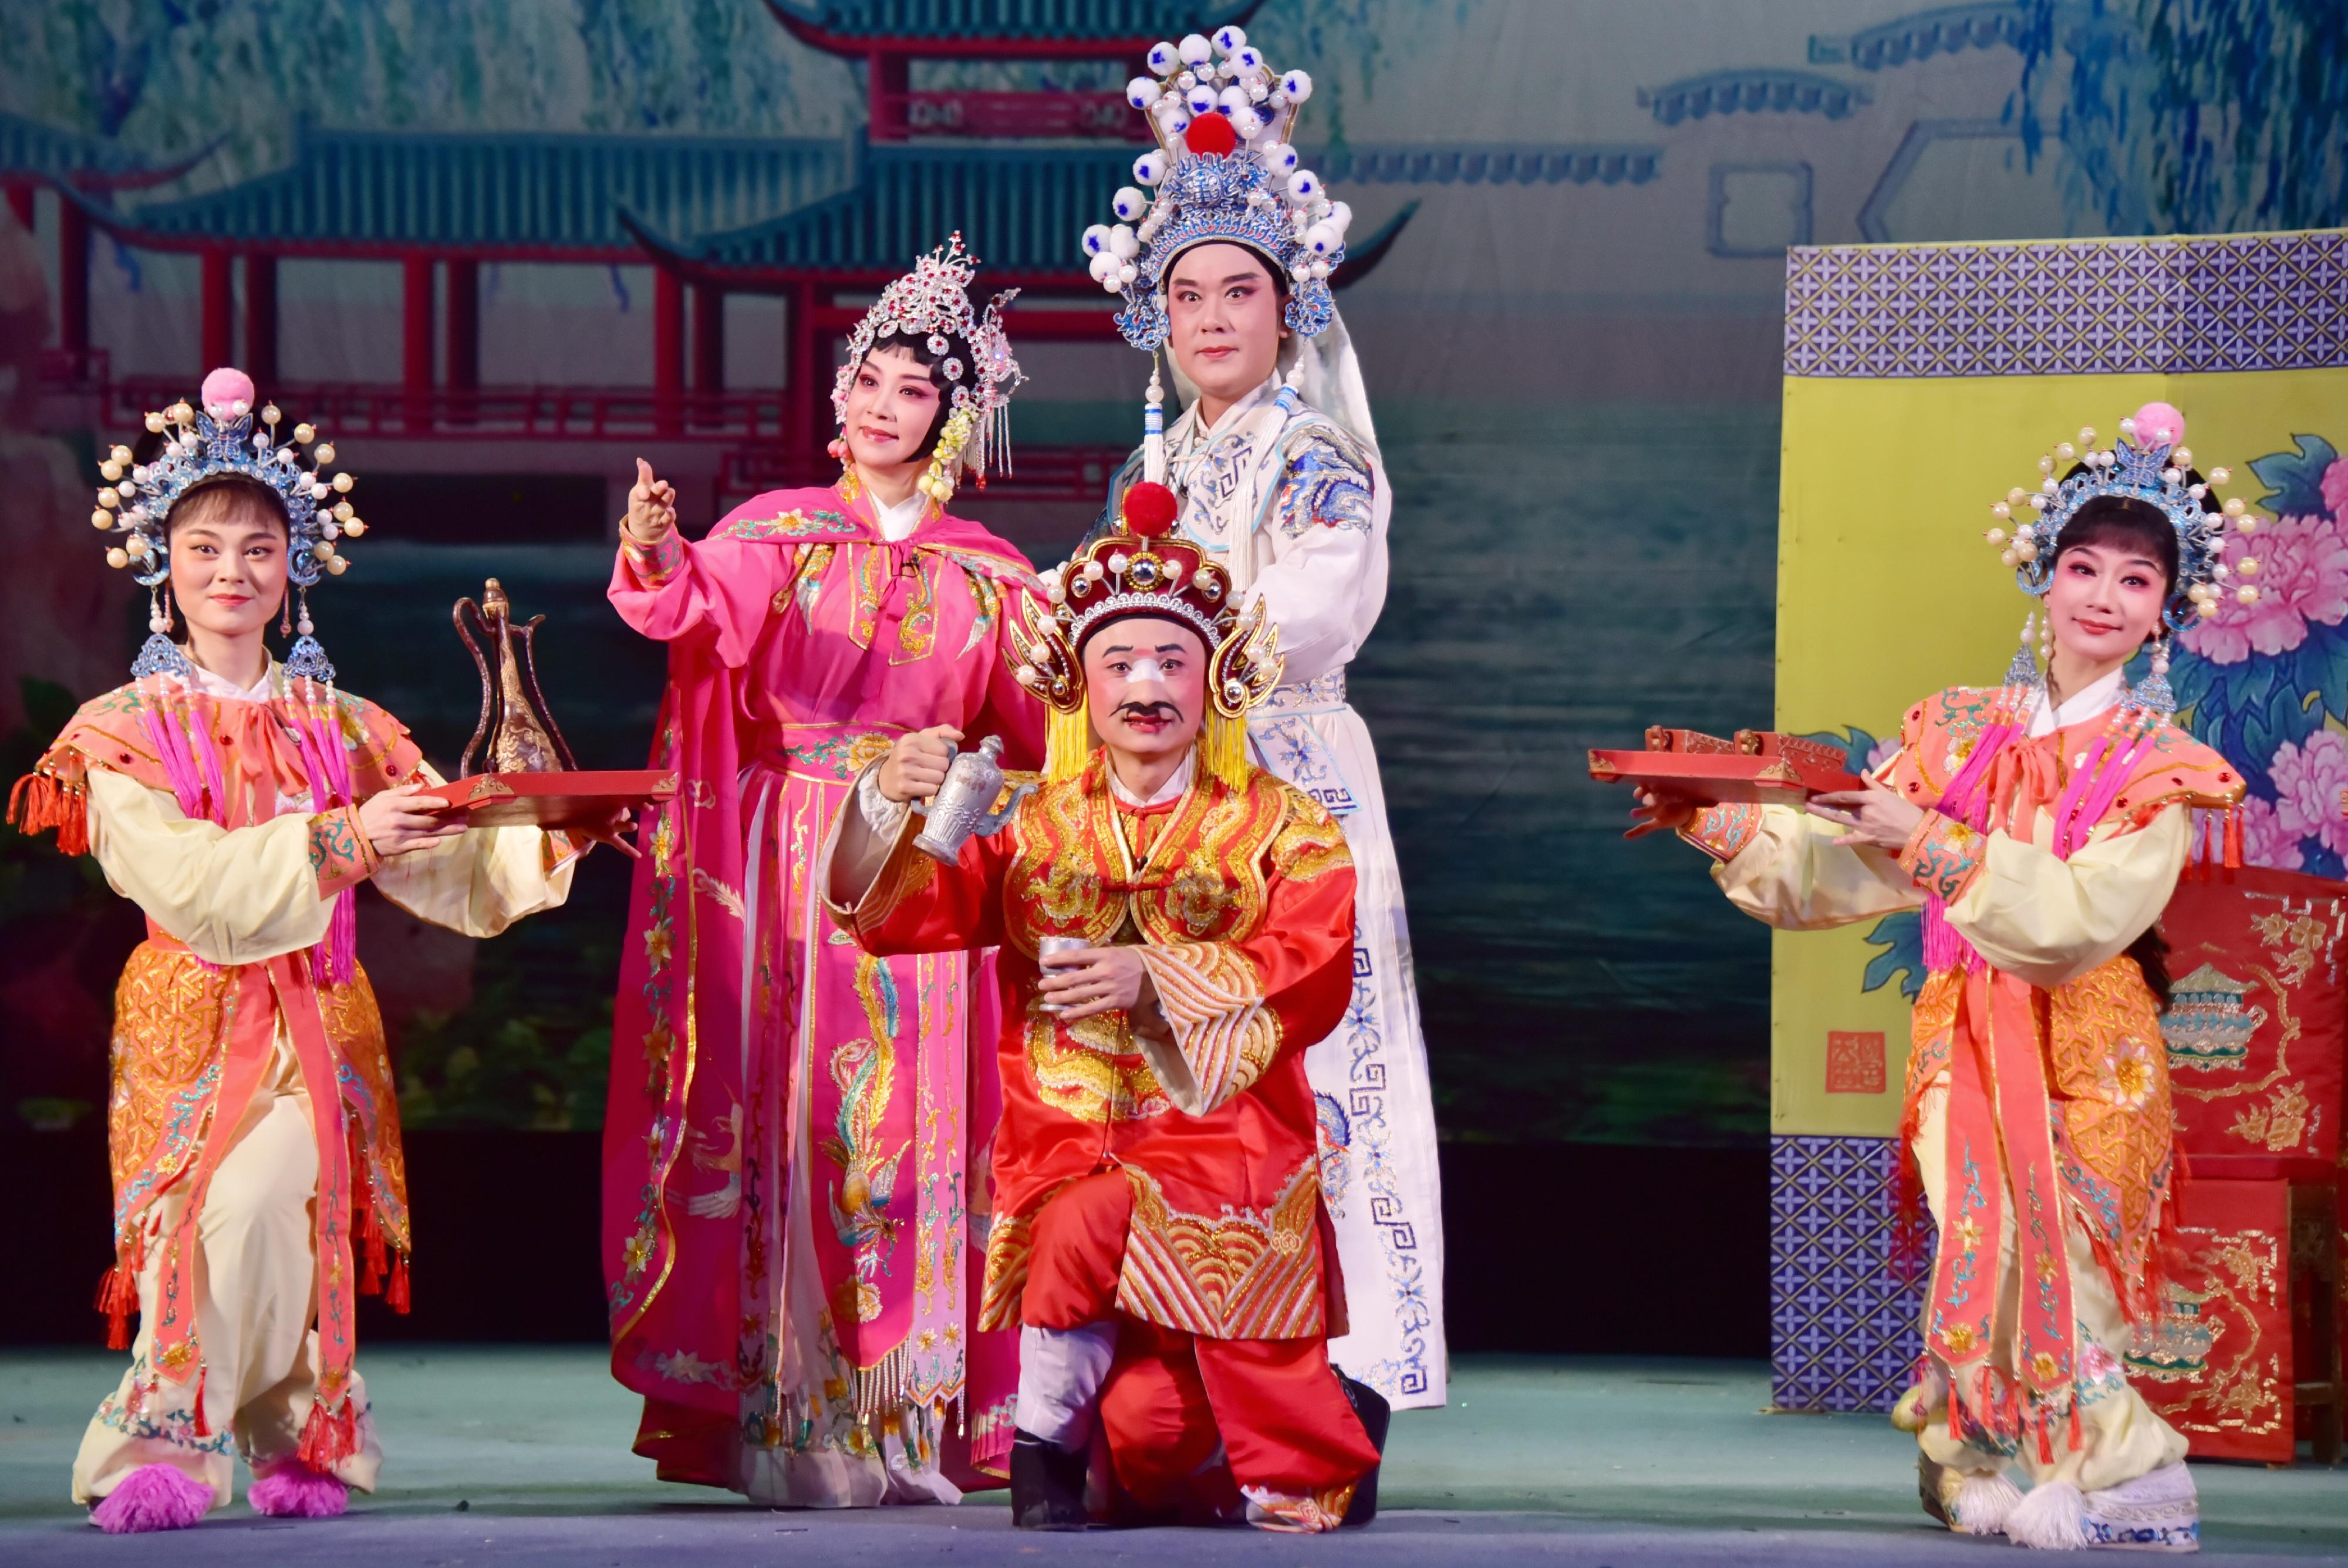 The Guangdong Chiu Chow Opera Theatre Number One Troupe and Sun Hon Kwong Chiu Chow Opera Troupe will collaborate for three captivating Chiuchow opera performances at the inaugural Chinese Culture Festival in late June. Photo shows a scene from the excerpt "Mu Guiying’s Marriage Proposal".